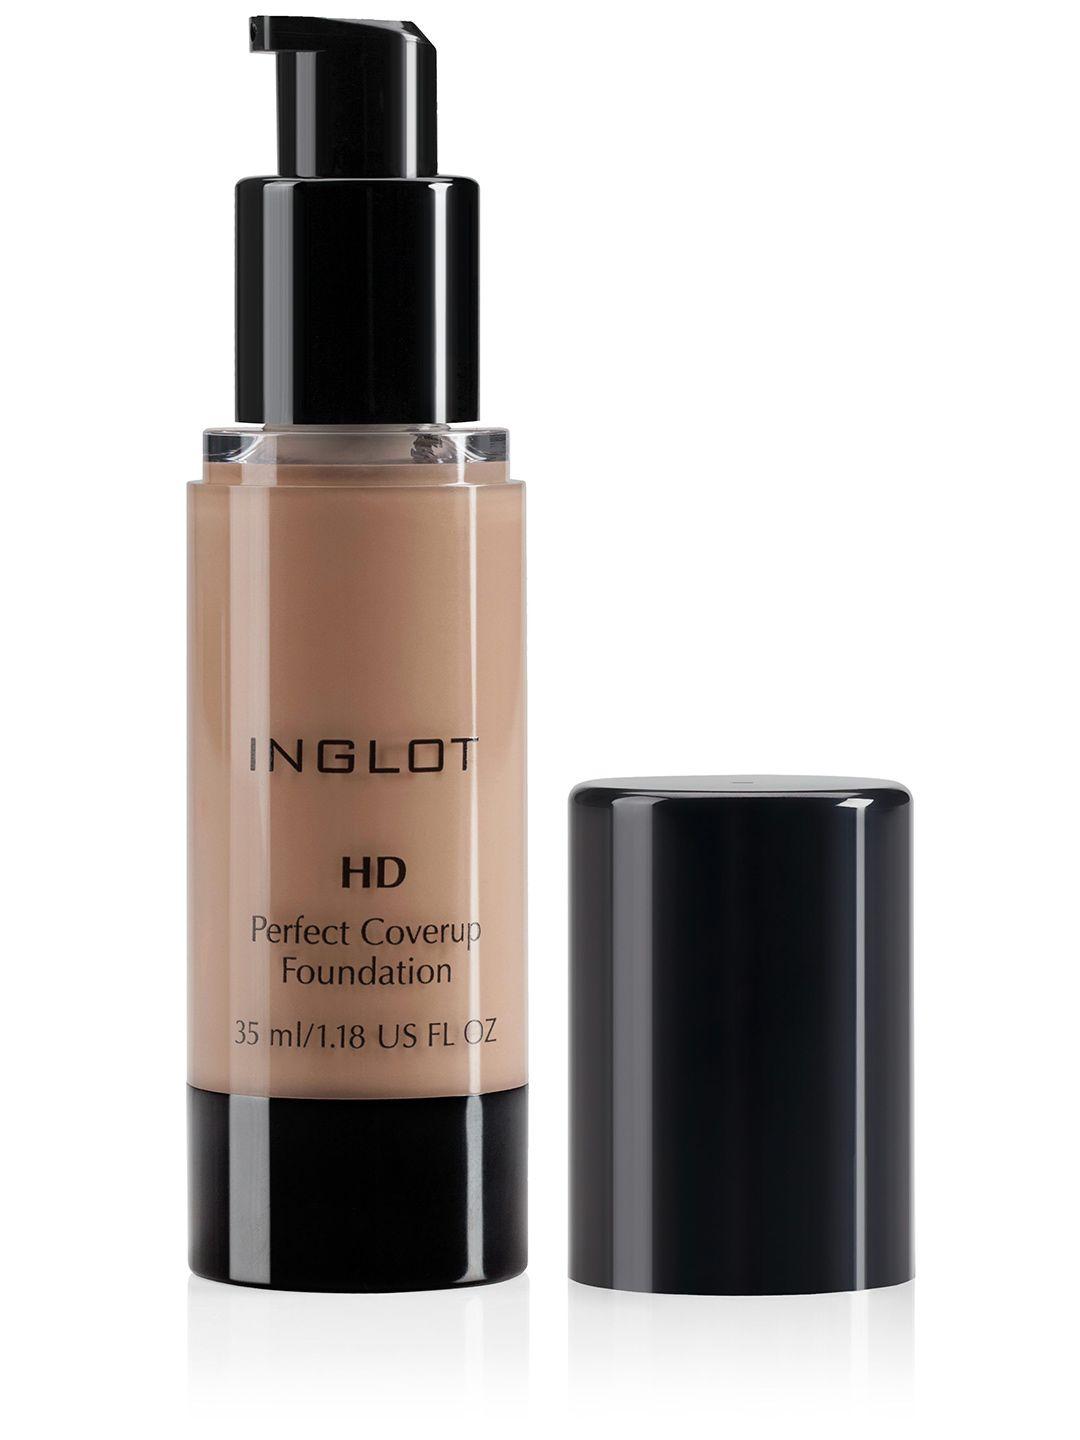 inglot hd perfect coverup foundation 35ml - nude 73